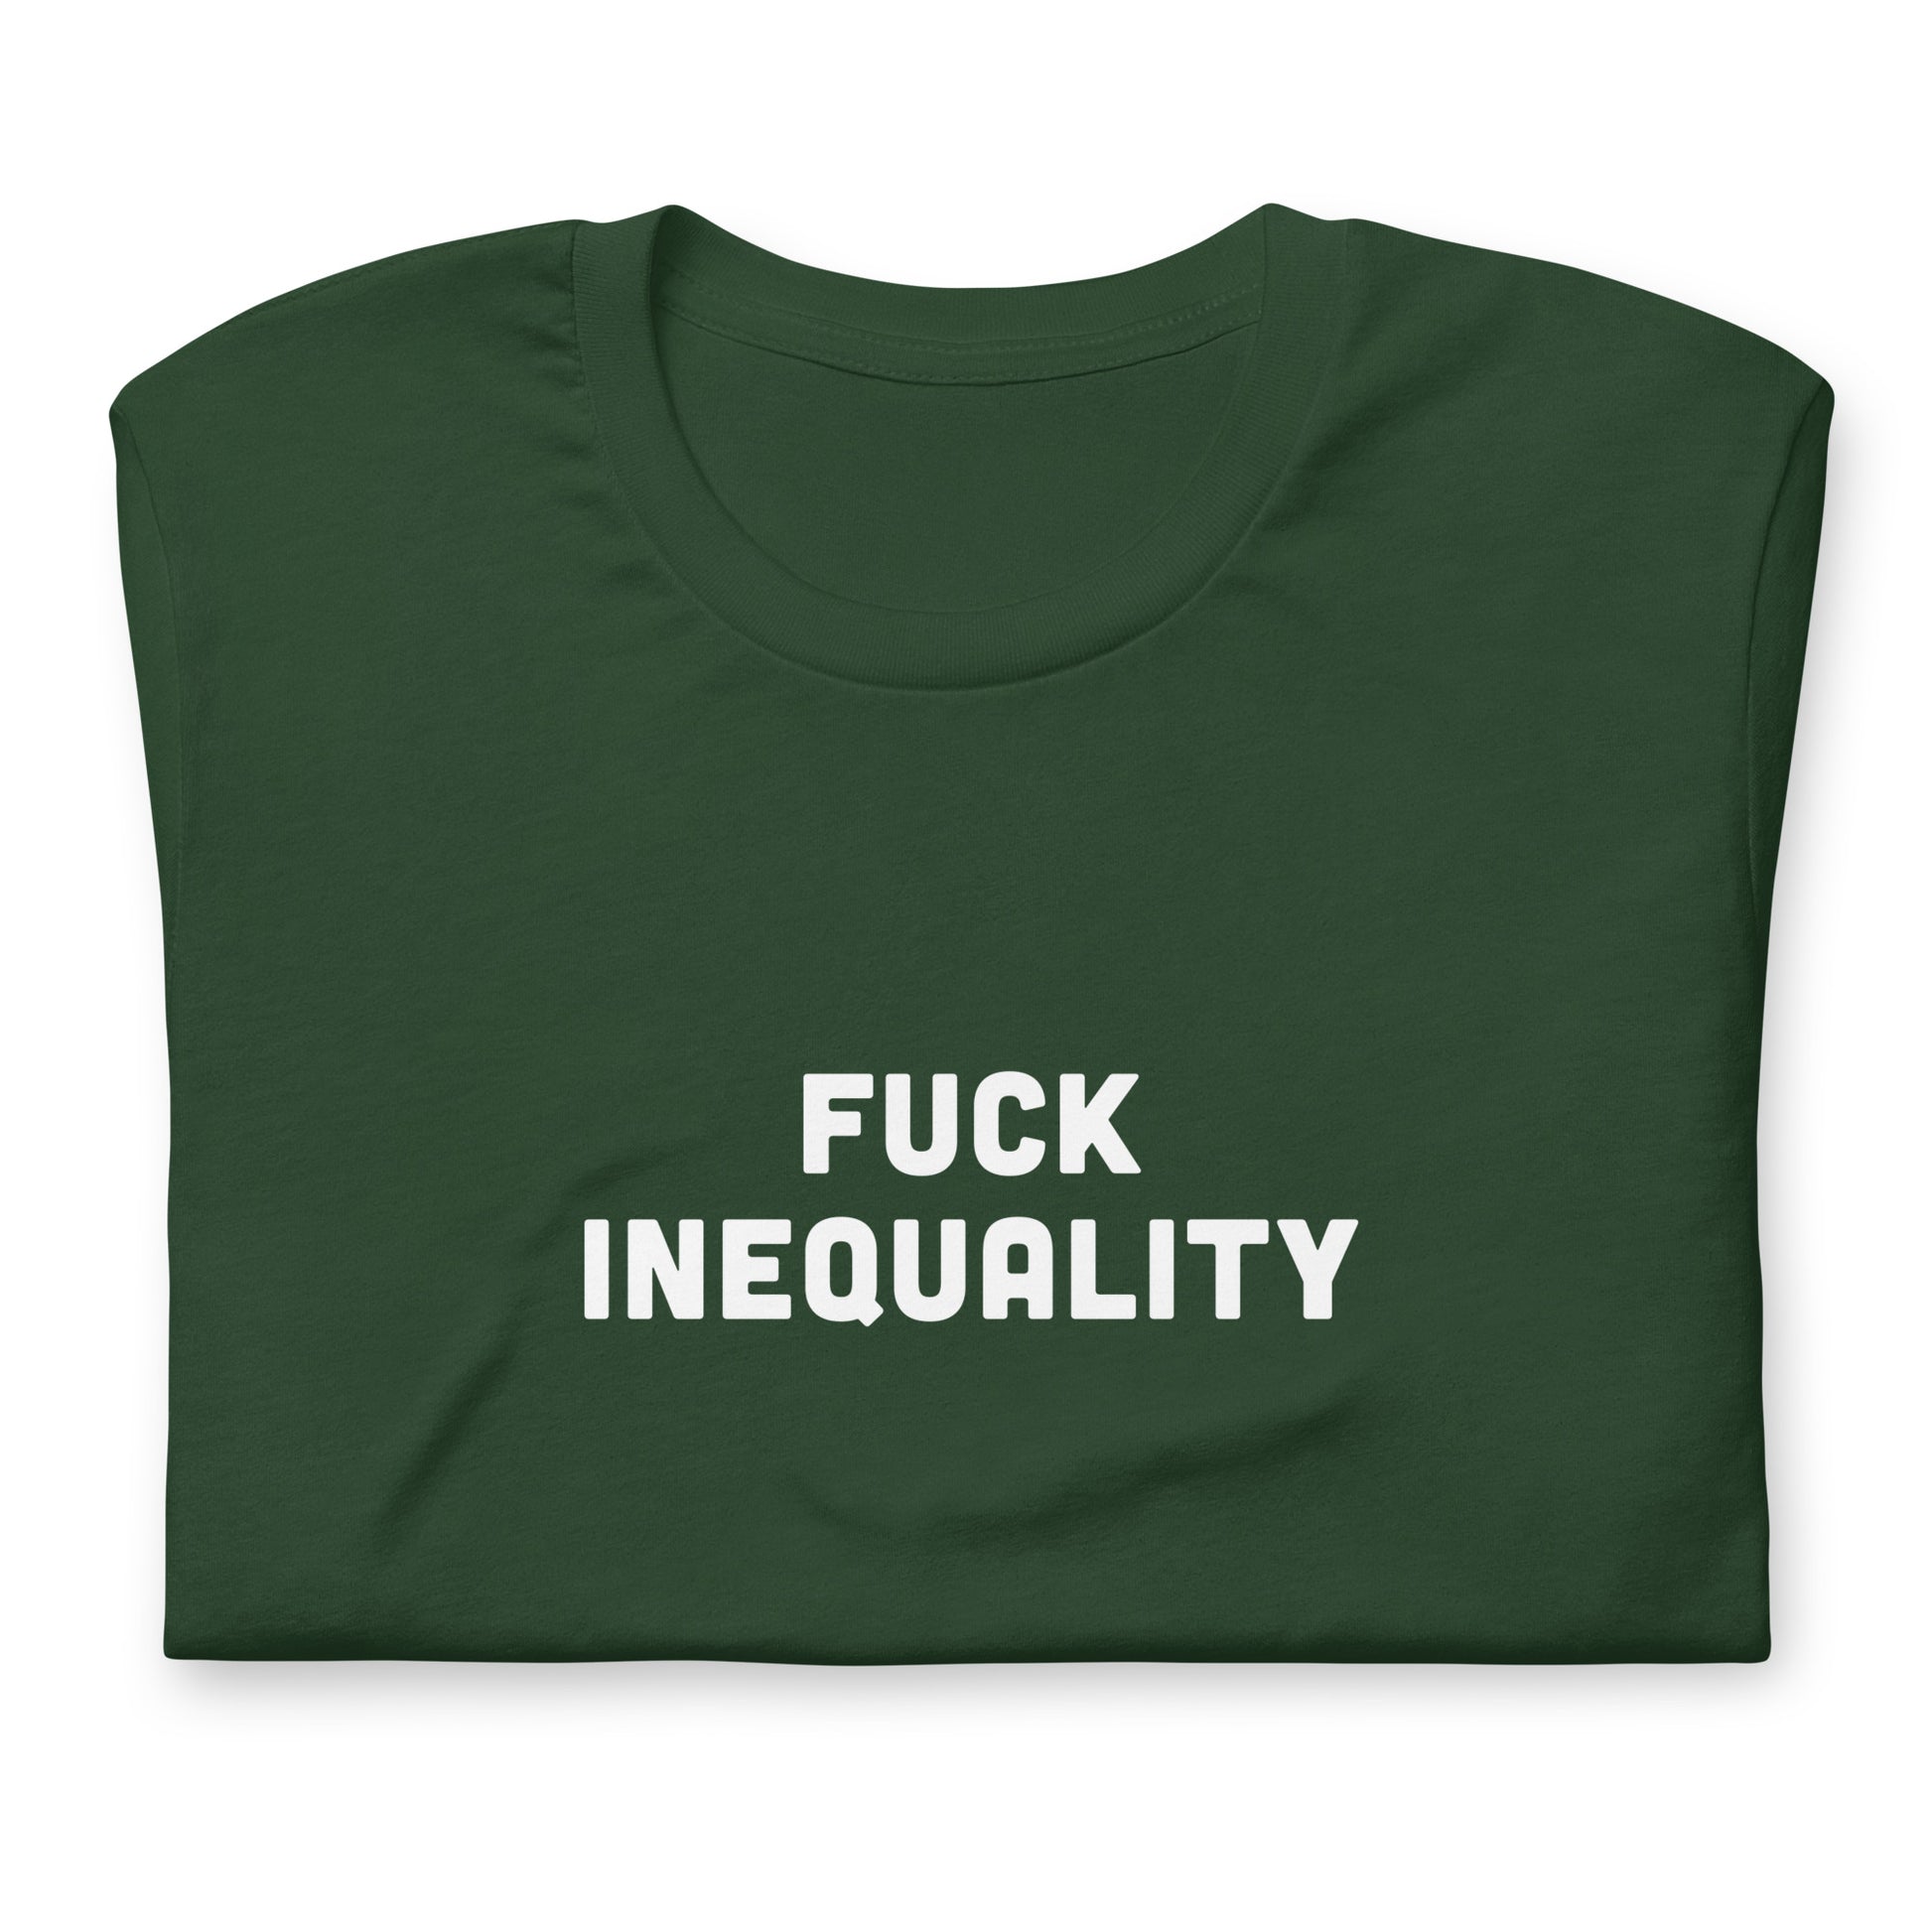 Fuck Inequality T-Shirt Size XL Color Black